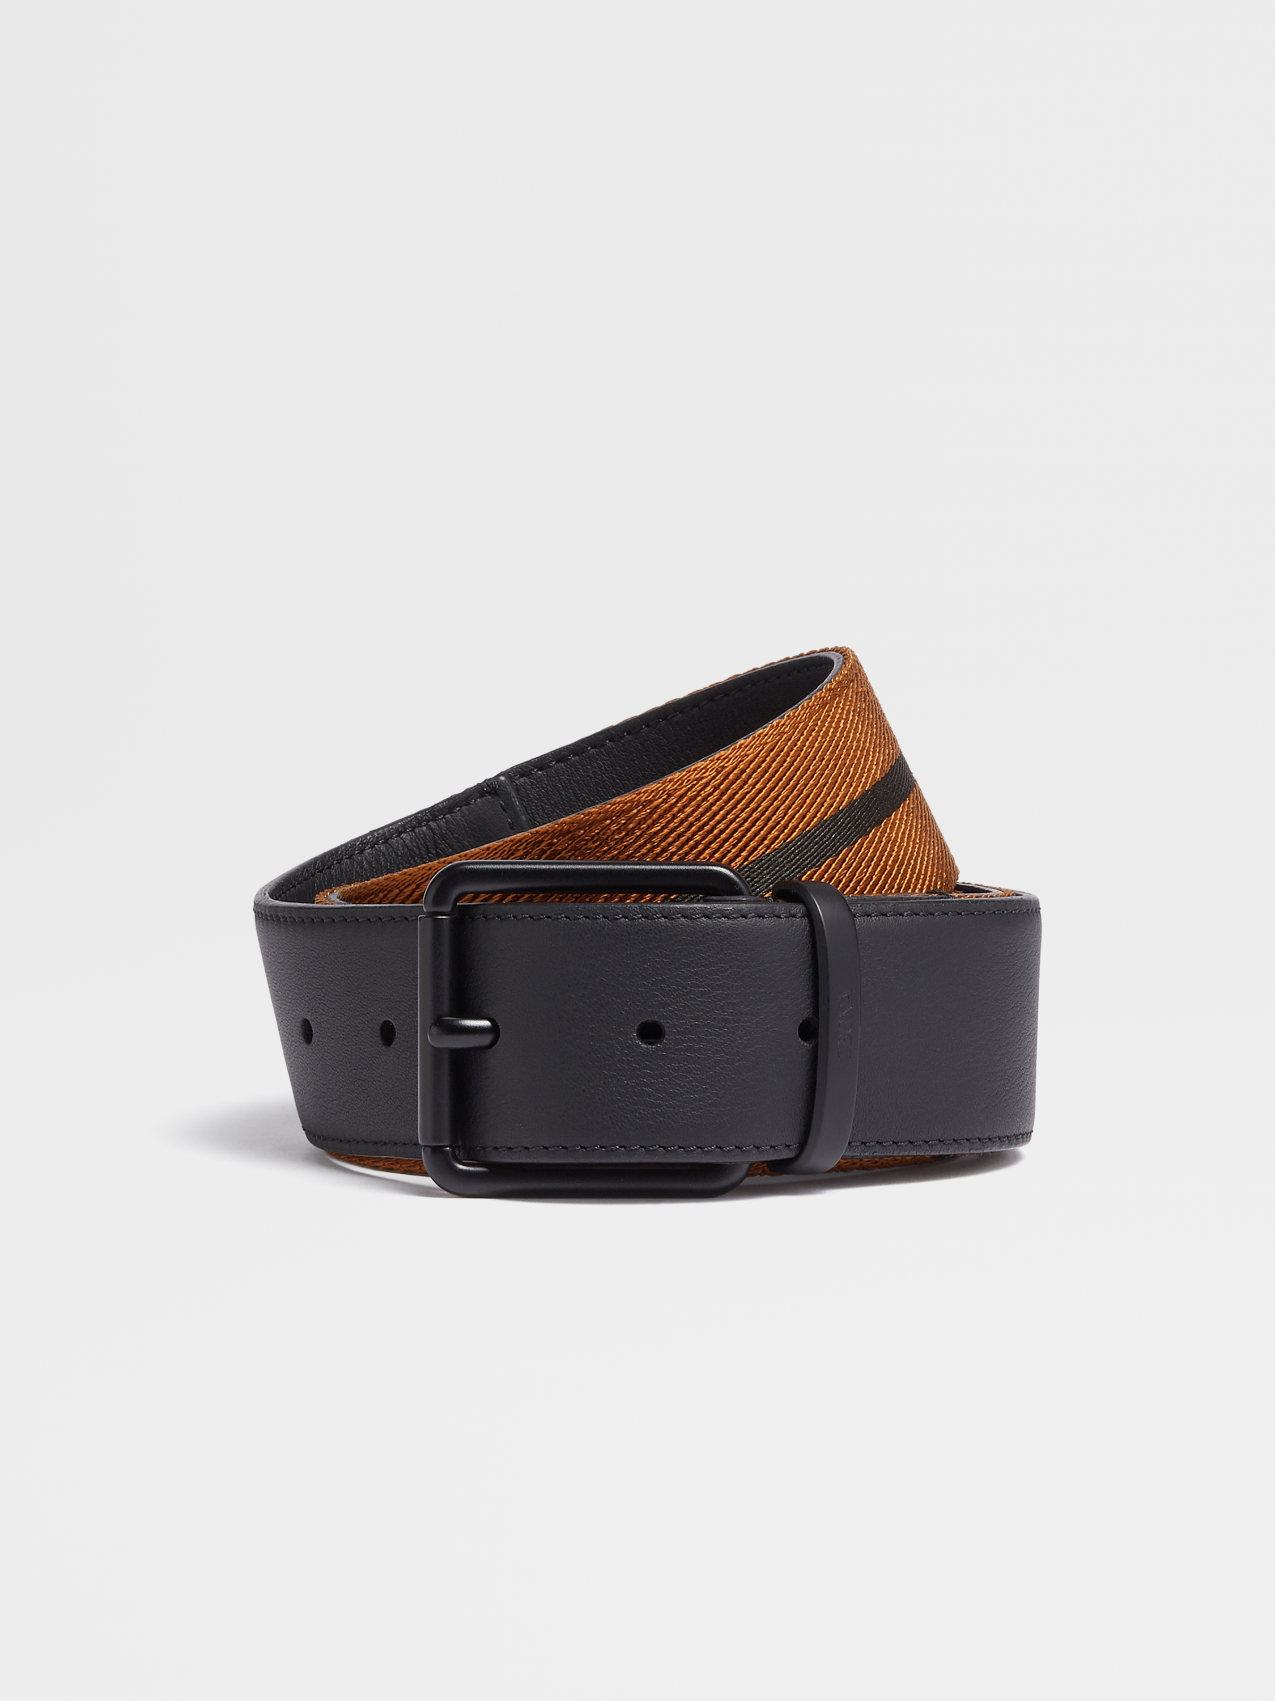 Black and Vicuna Color Technical Fabric Belt